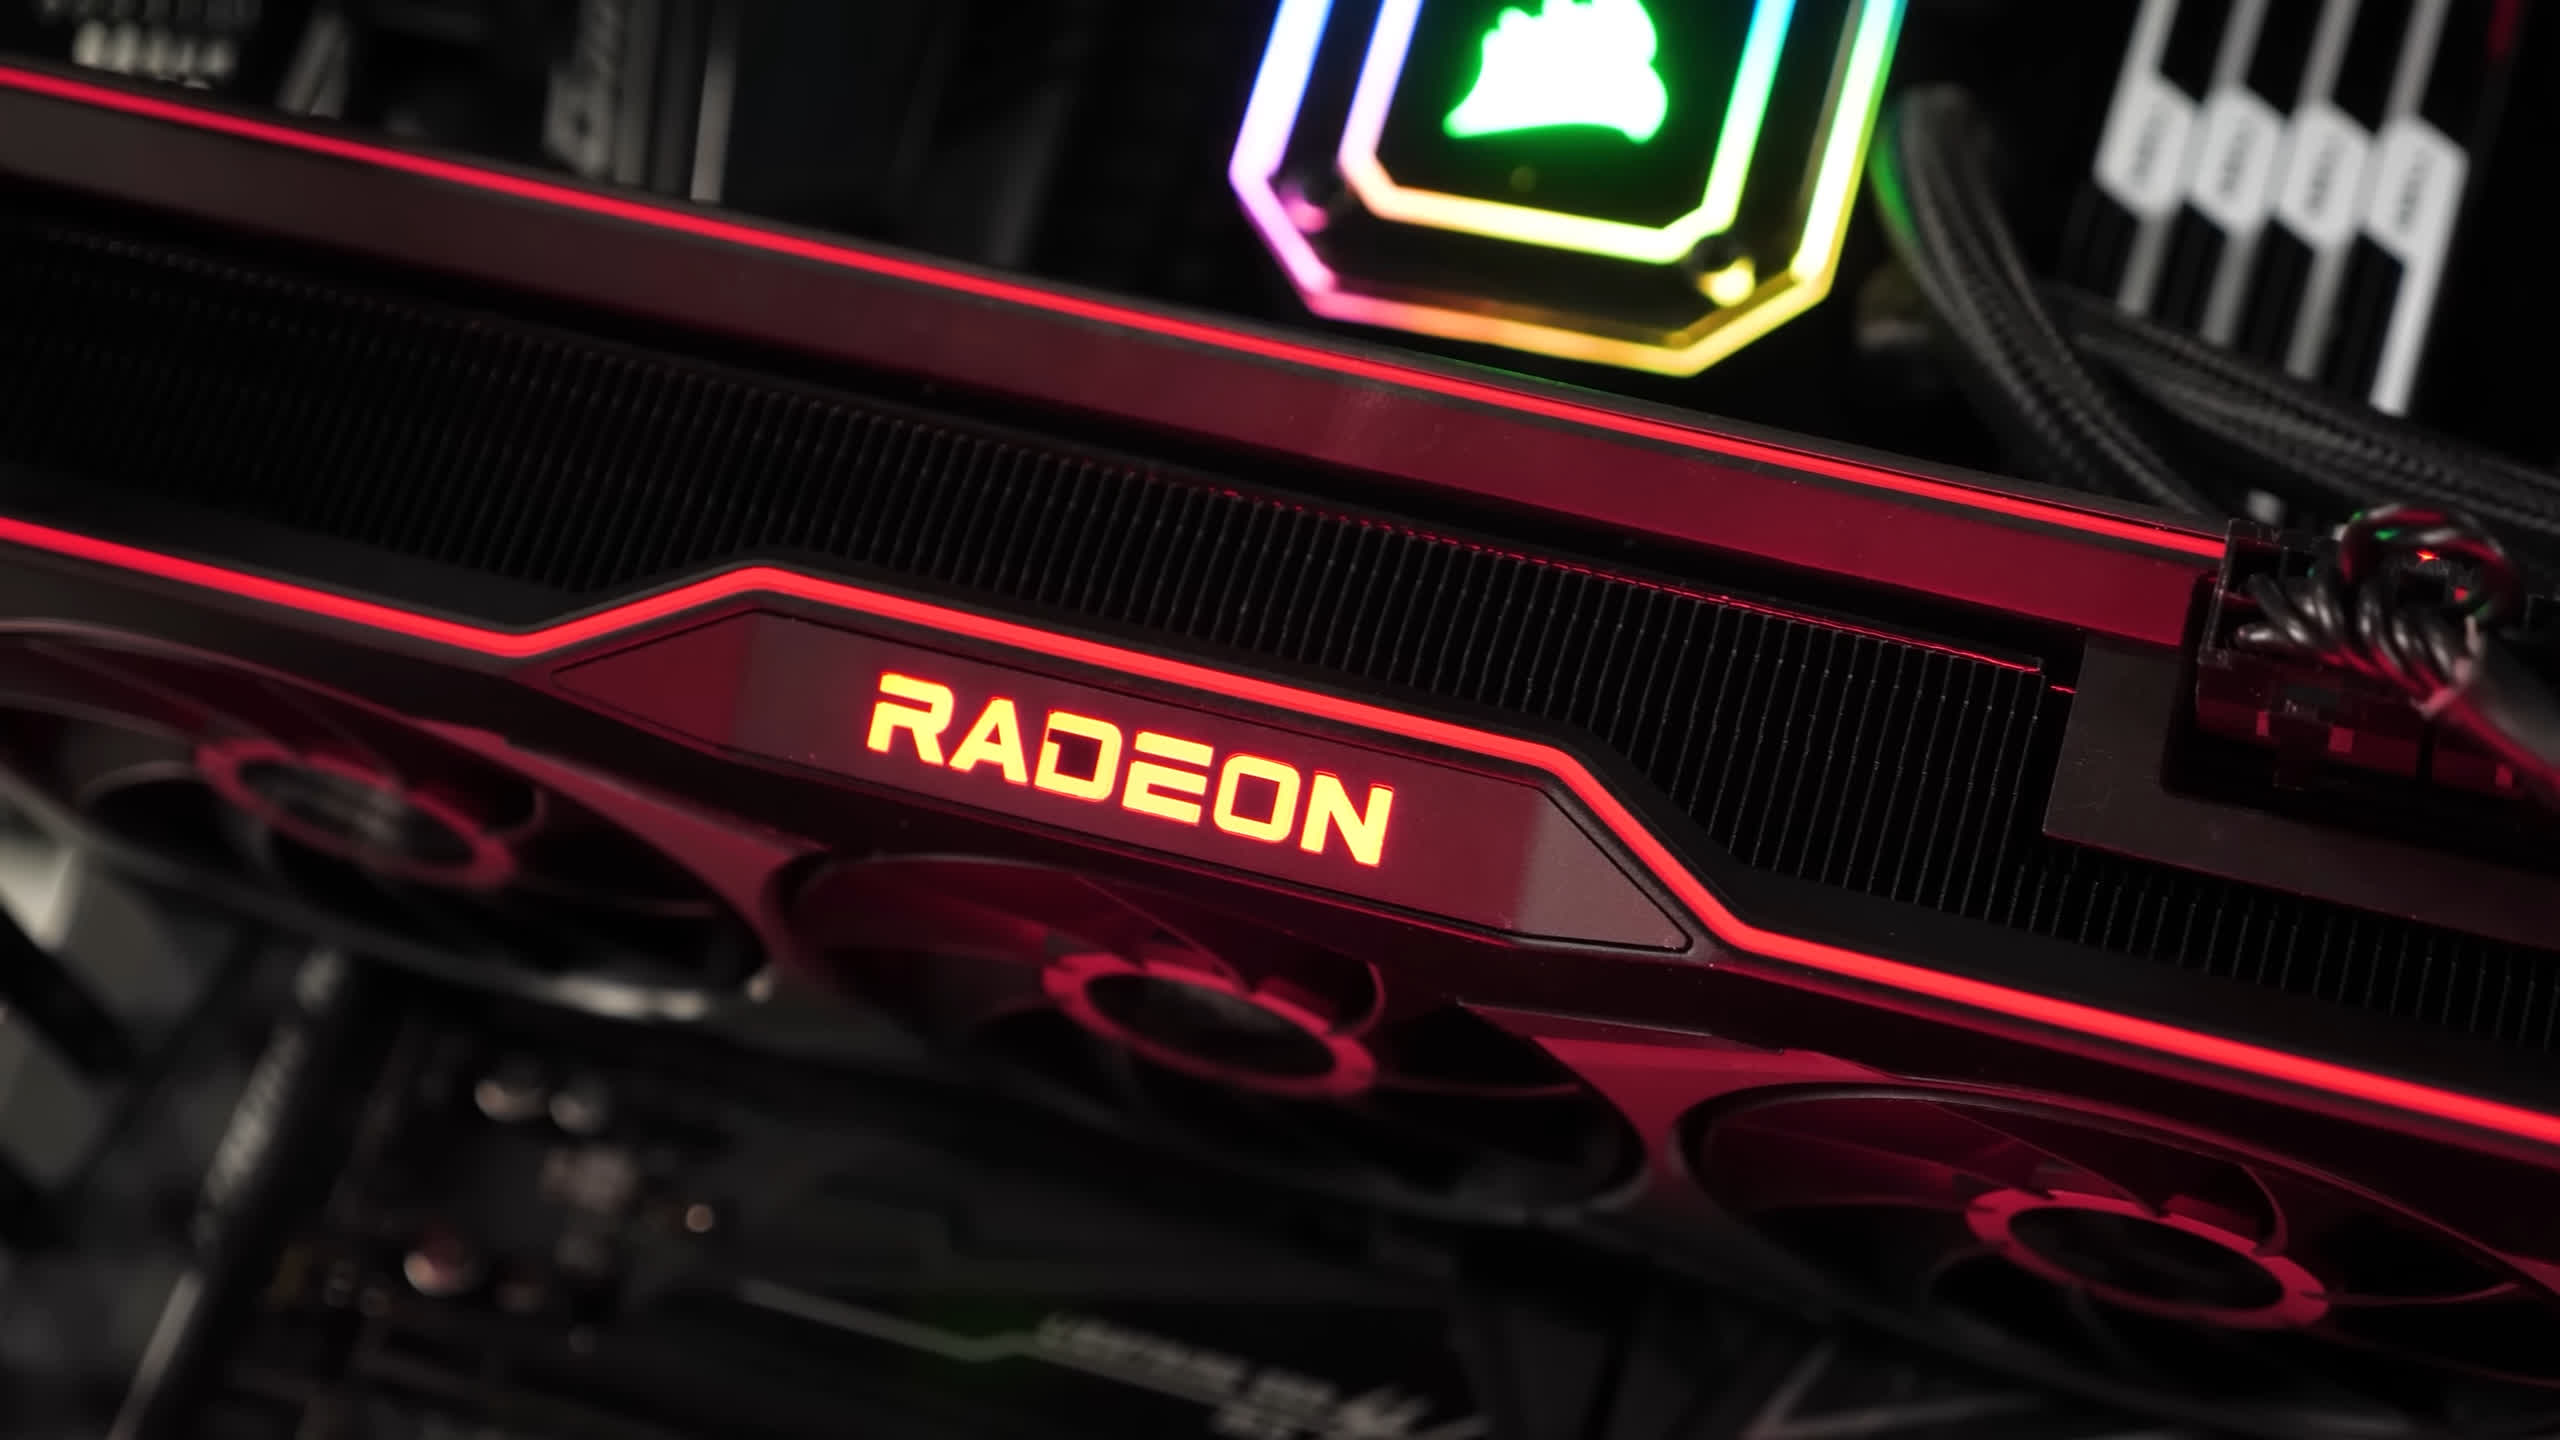 New leak seemingly confirms AMD Radeon RX 7600 specifications ahead of imminent launch